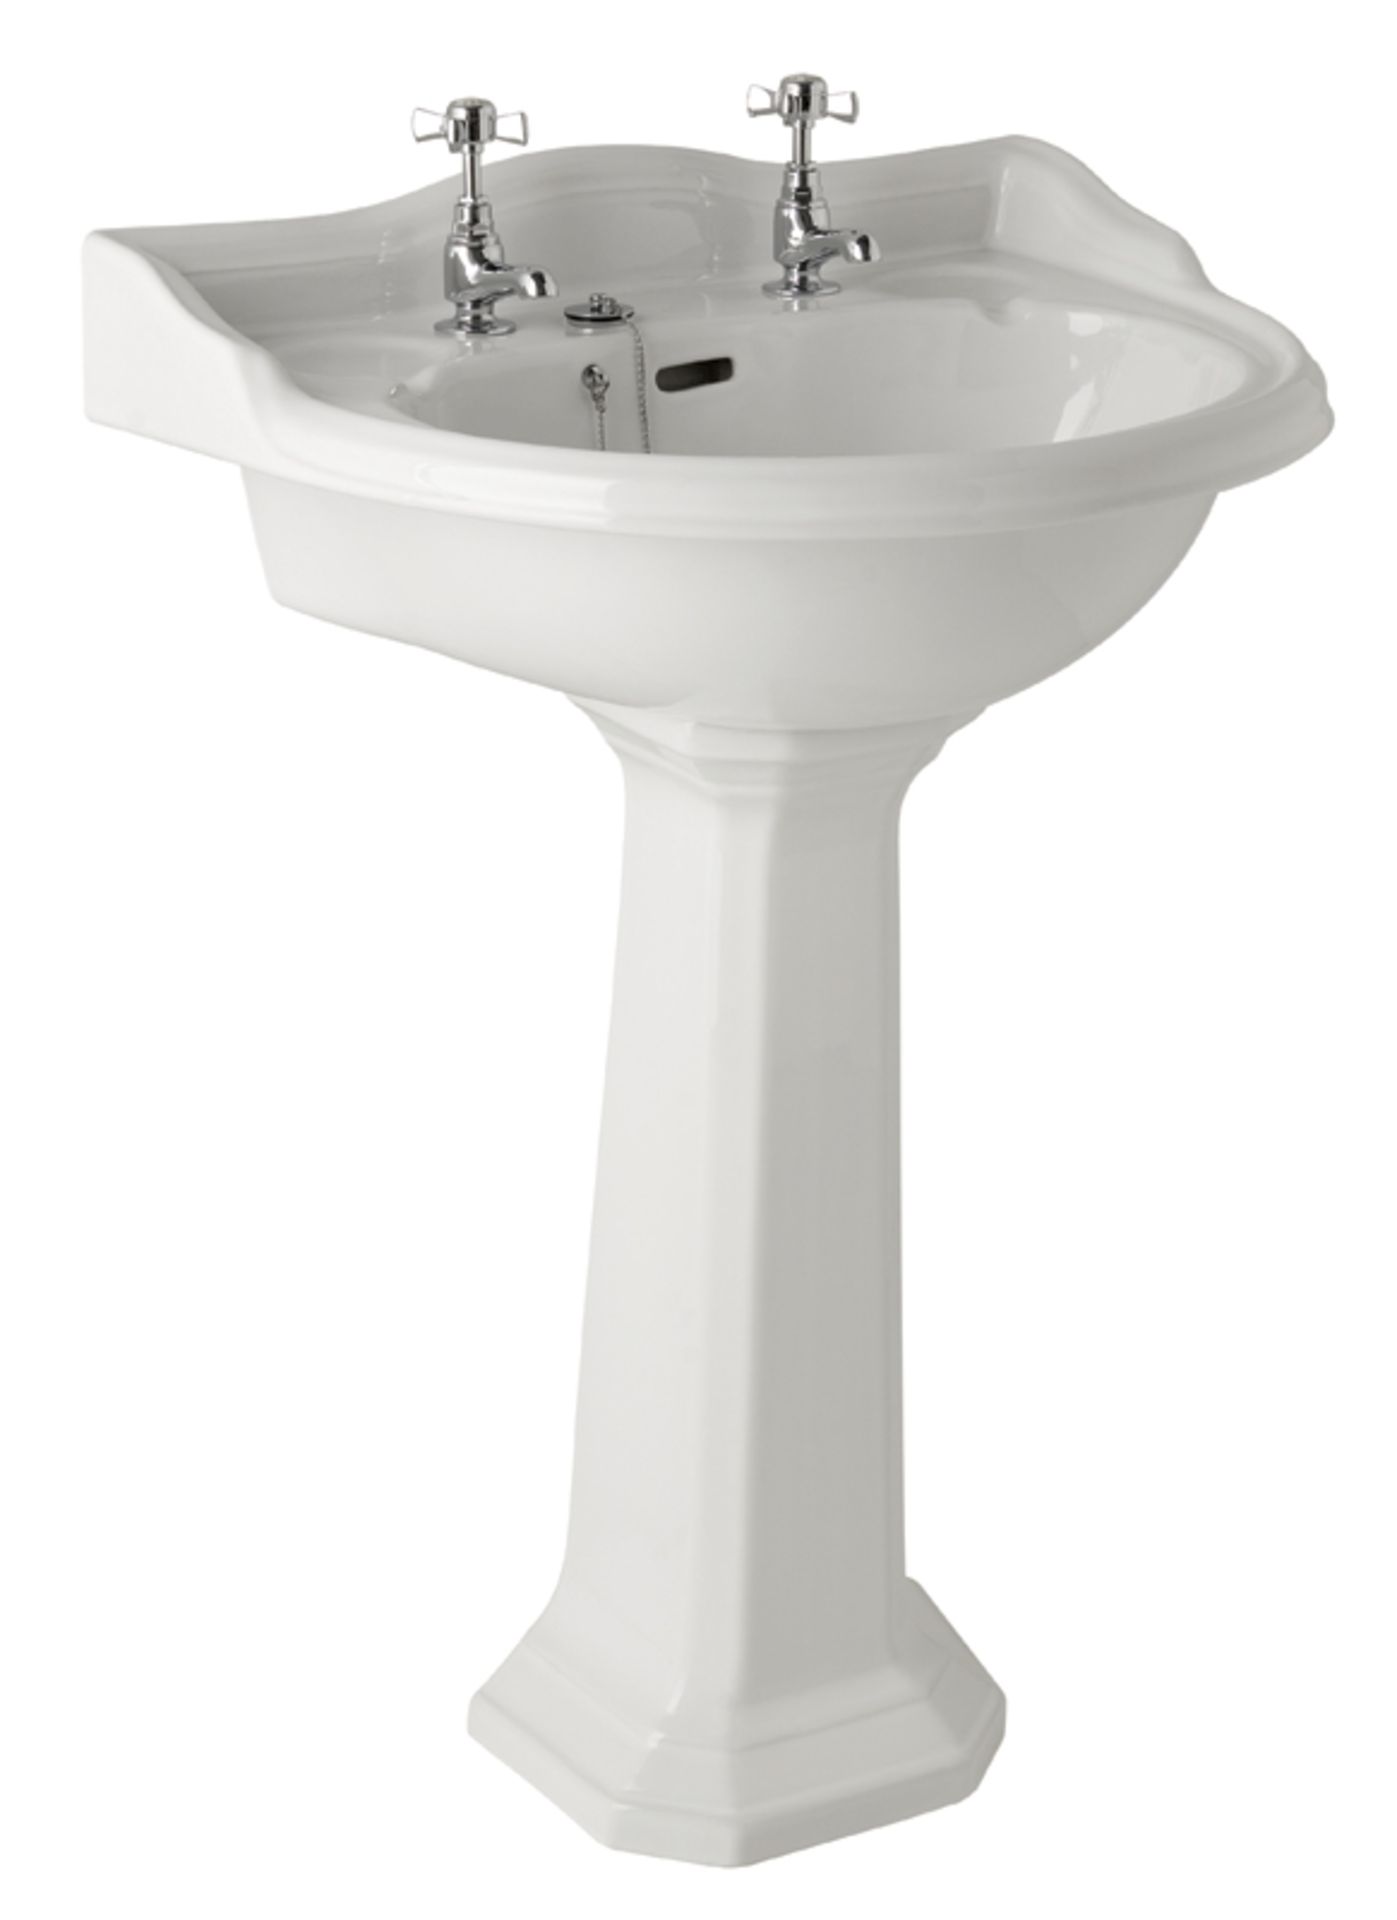 22 x Vogue Bathrooms DAVENPORT Two Tap Hole SINK BASINS - Basins Only - Pedestals Not Included - - Image 2 of 2